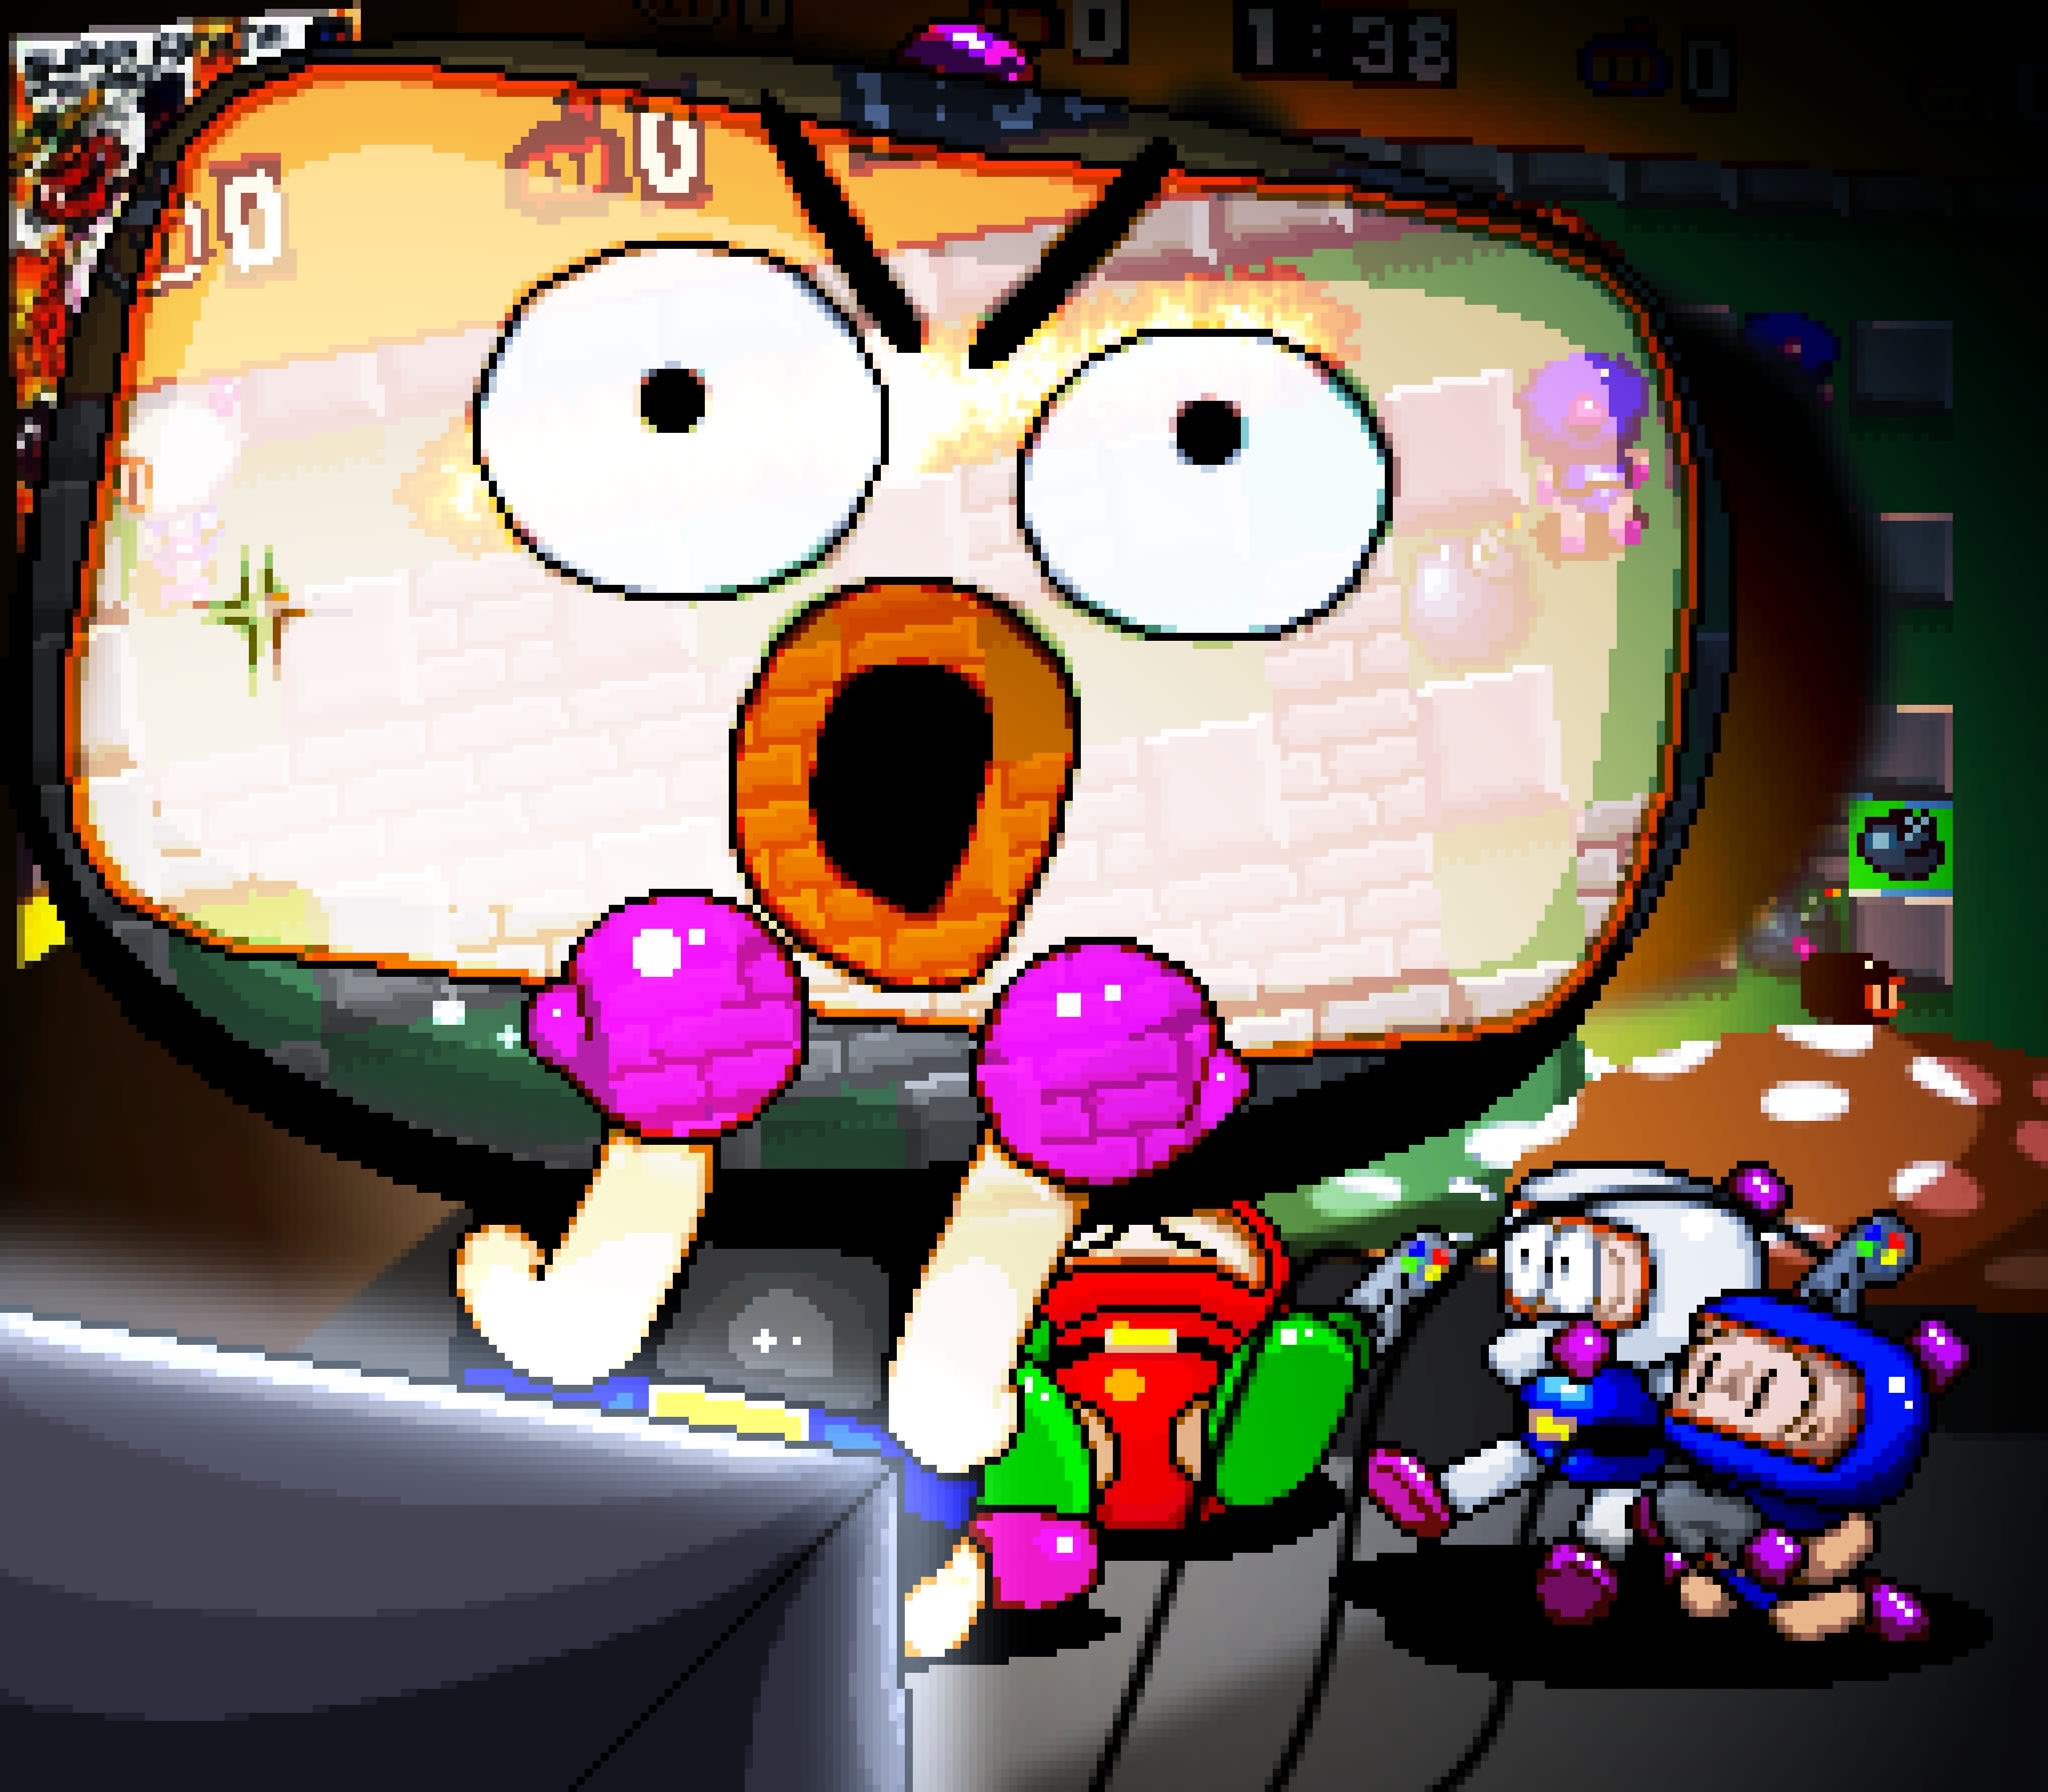 Lily S. on X: Super Bomberman 4 finished fanart! This game and 5